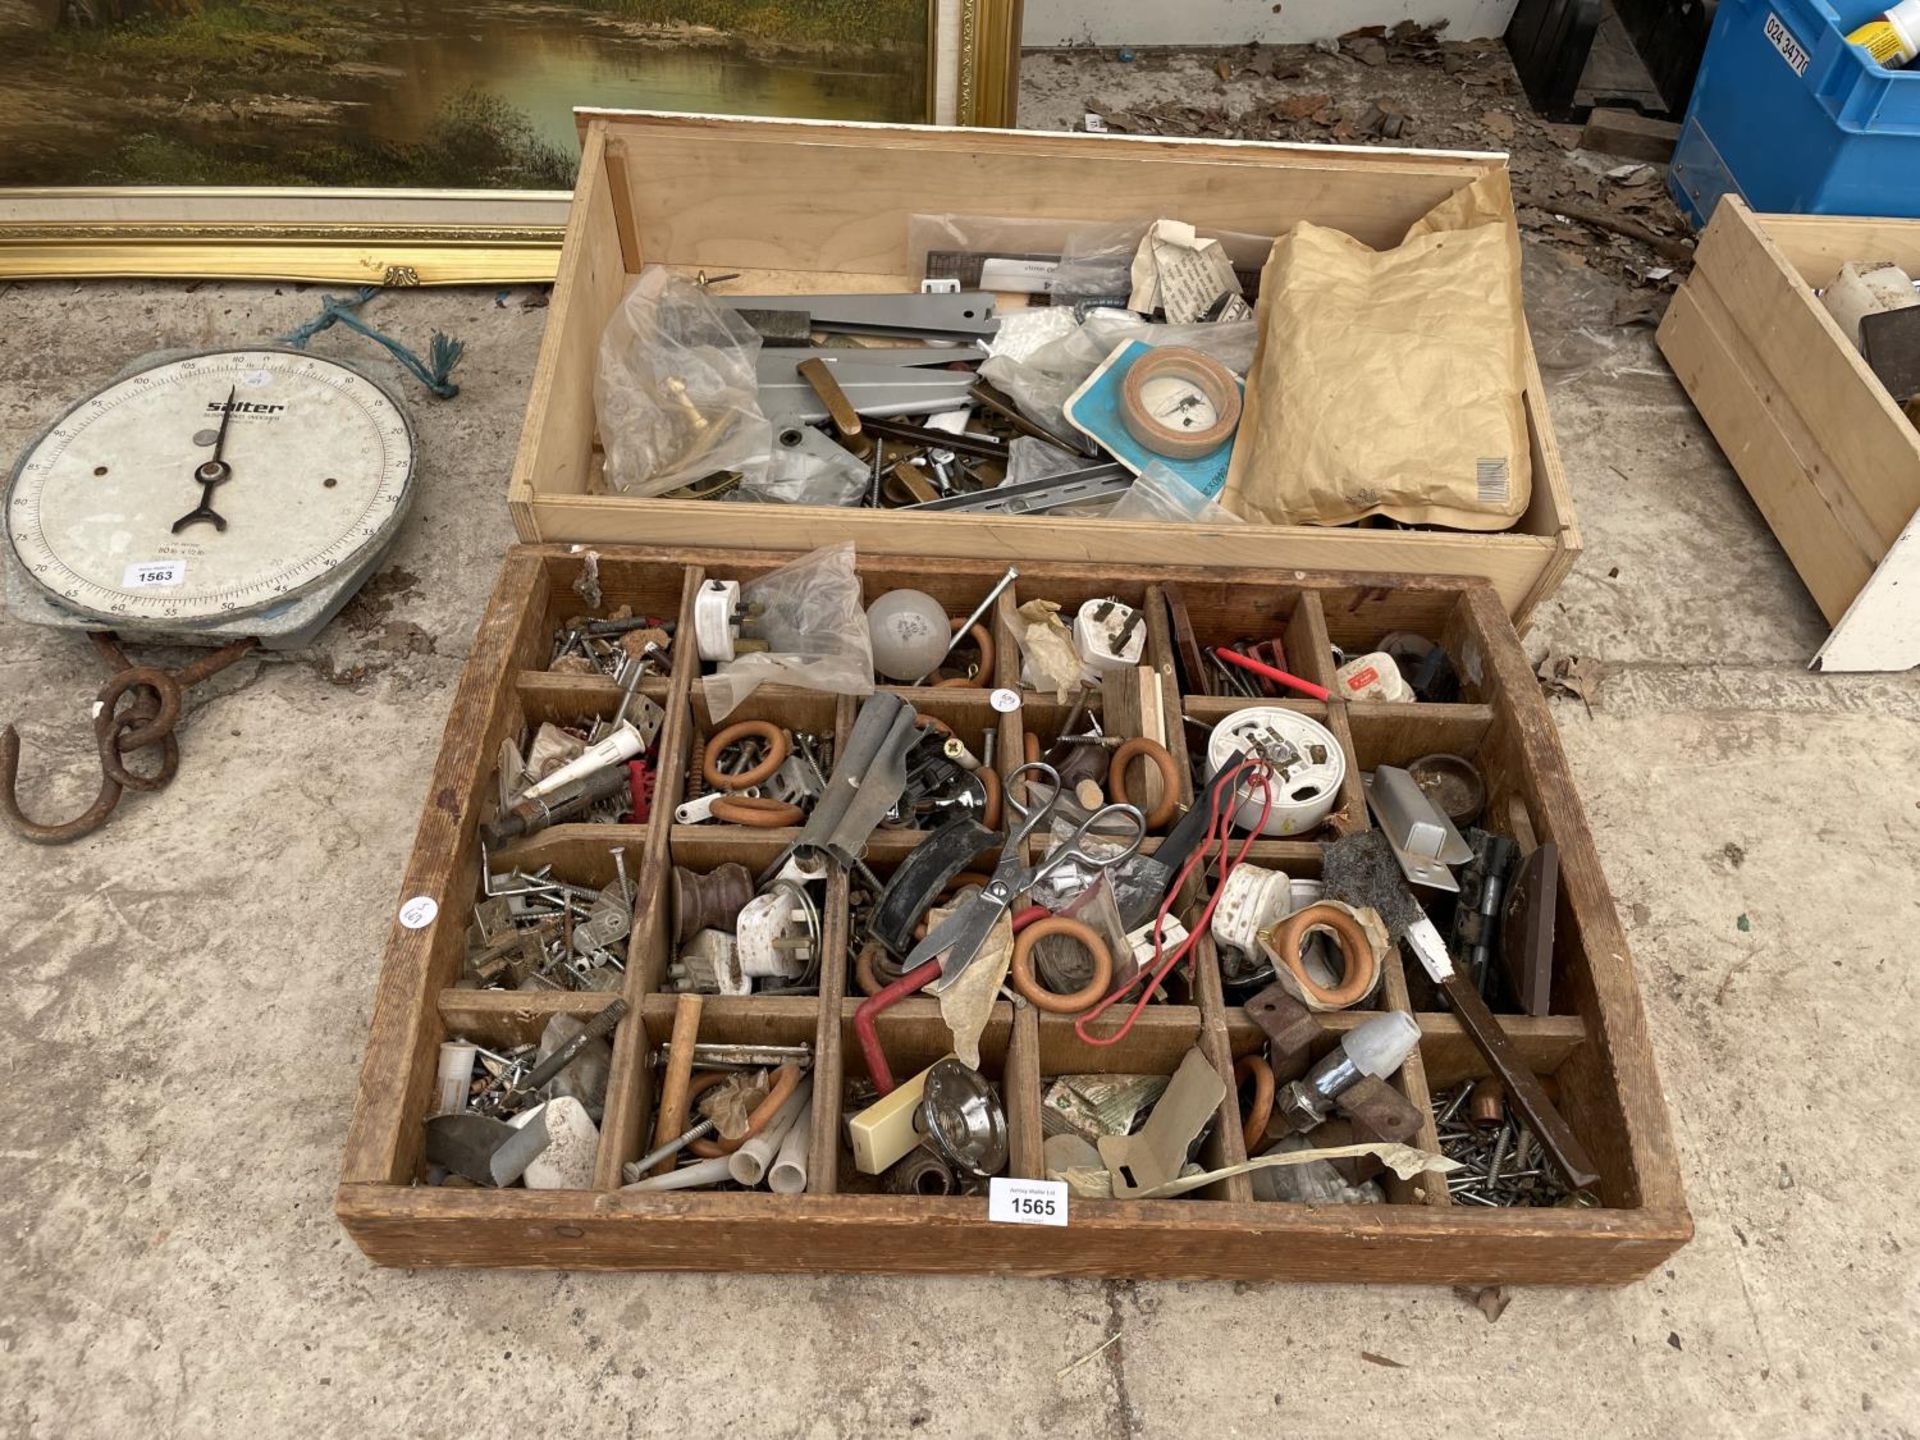 AN ASSORTMENT OF HARDWARE ITEMS TO INCLUDE SCREWS, PLUGS AND SHELVING BRACKETS ETC